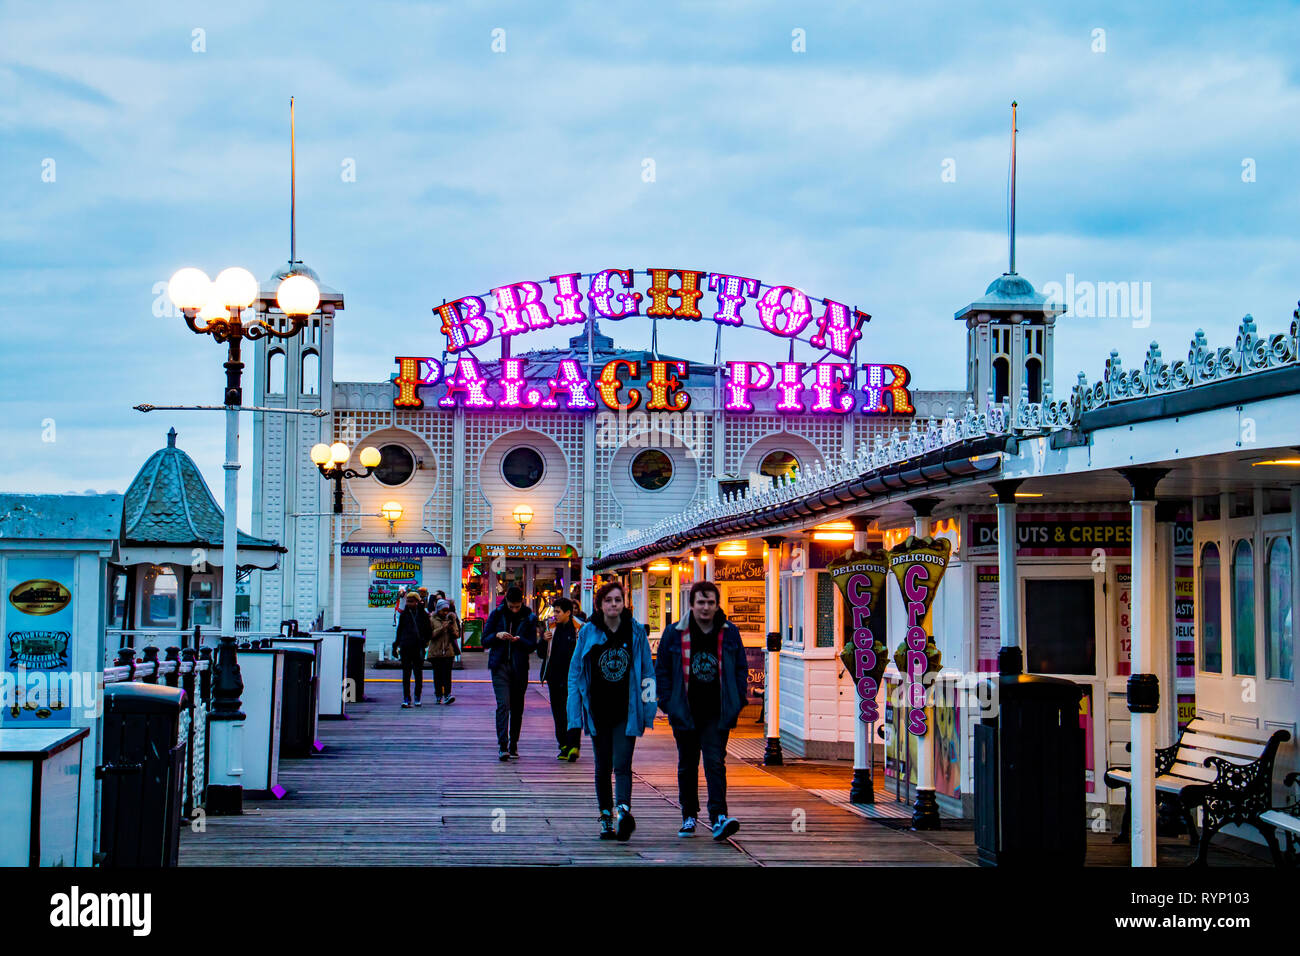 People strolling on Brighton Palace Pier in the evening with its colourful sign glowing in the dimming light Stock Photo